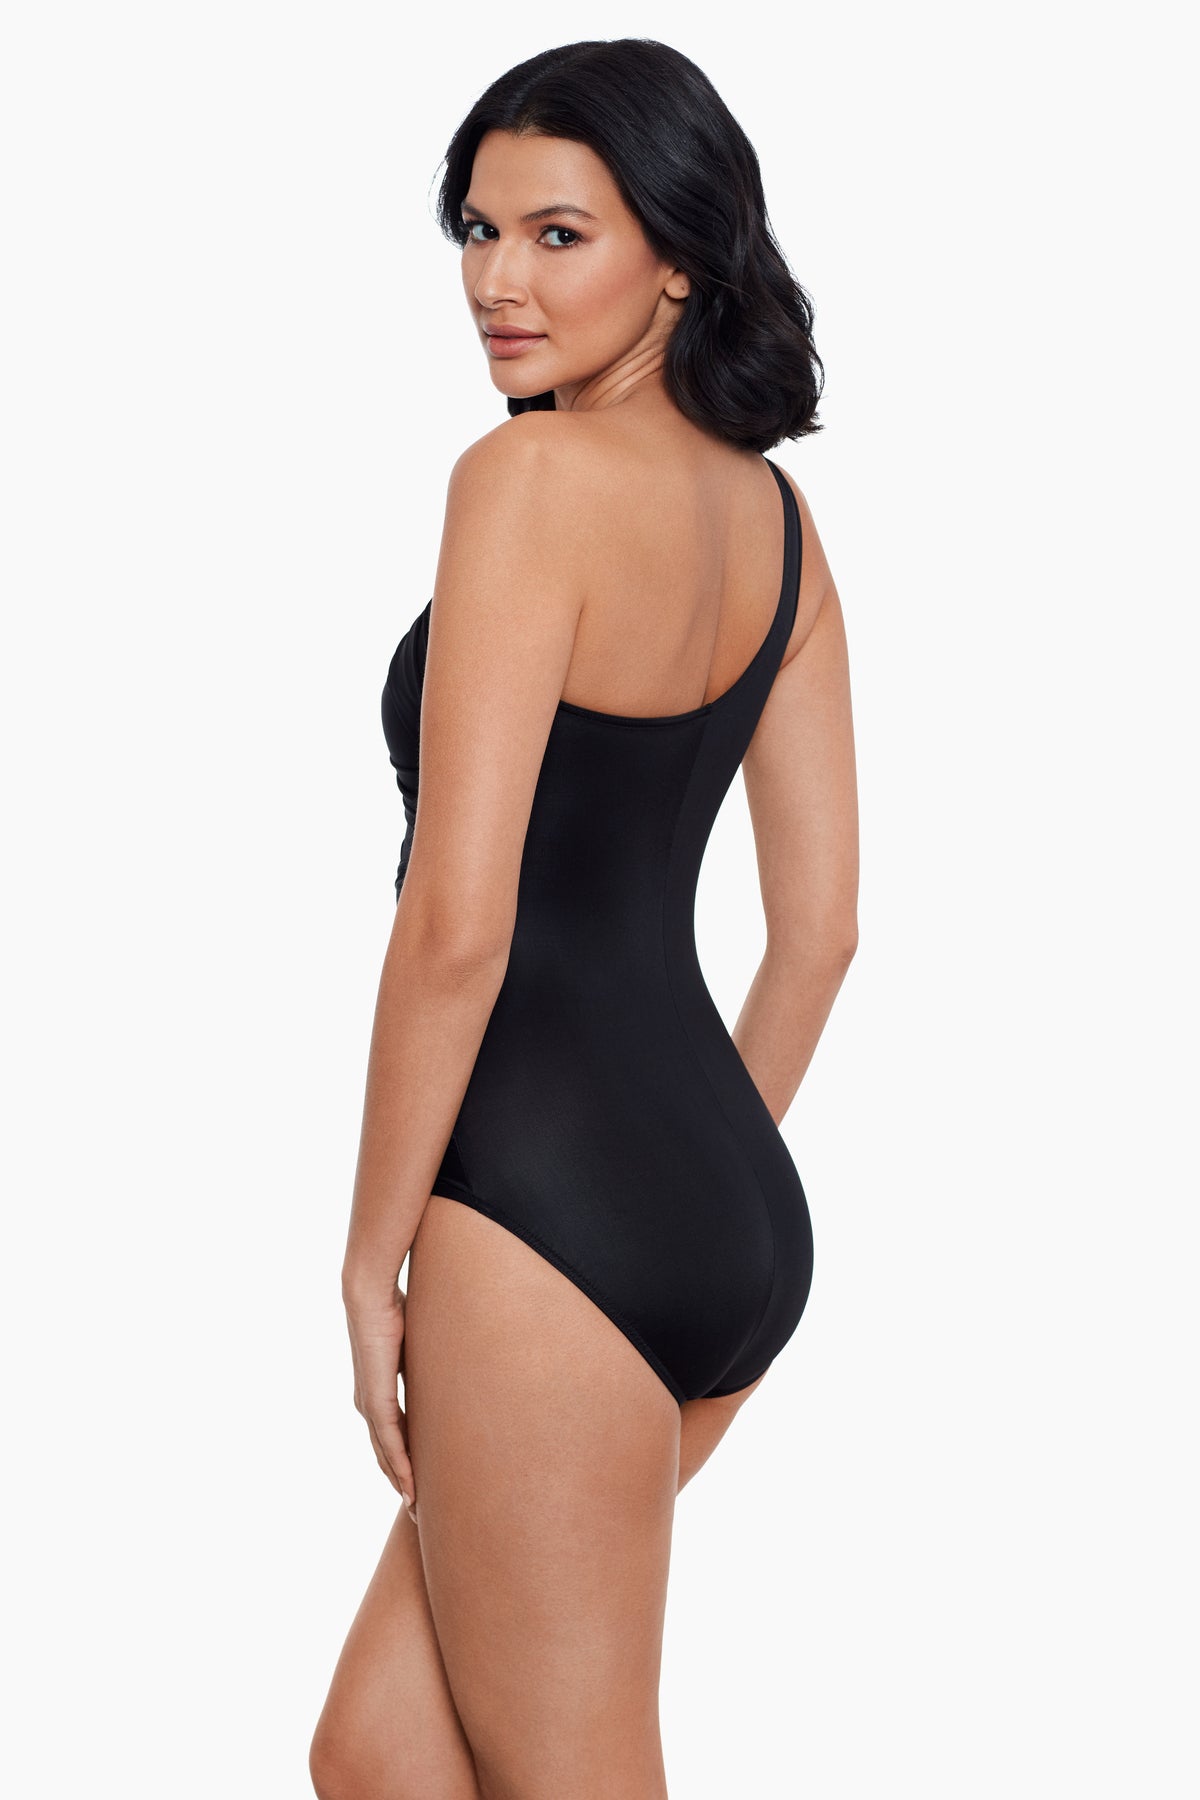 Miraclesuit Women's Network Jena One Piece Swimsuit at